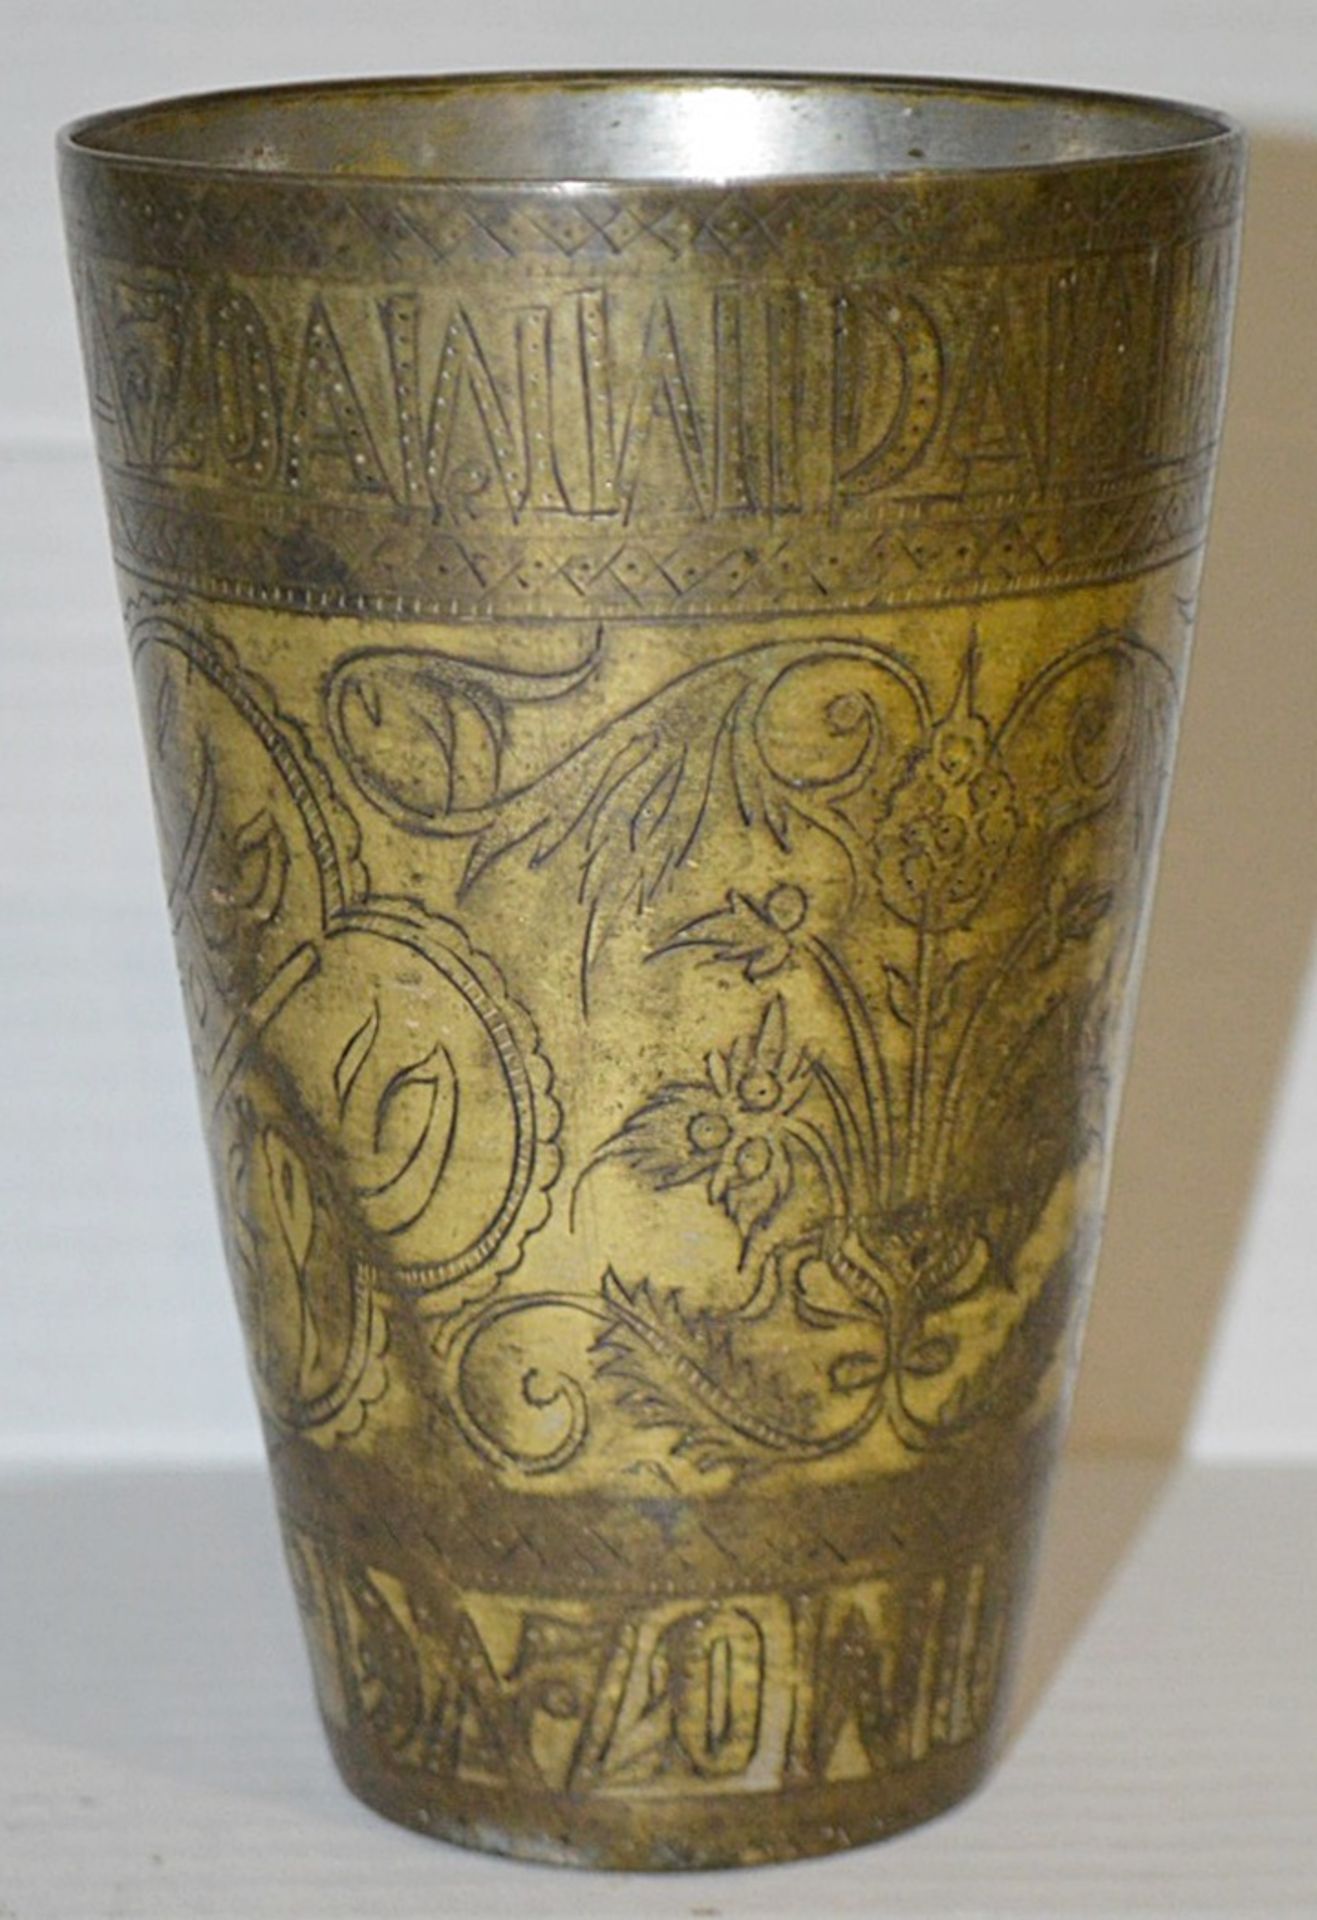 1 x Persian Gilded Tinner Beaker - Decorated With Floral Design And Scripture - Height: 14.5cm (5.